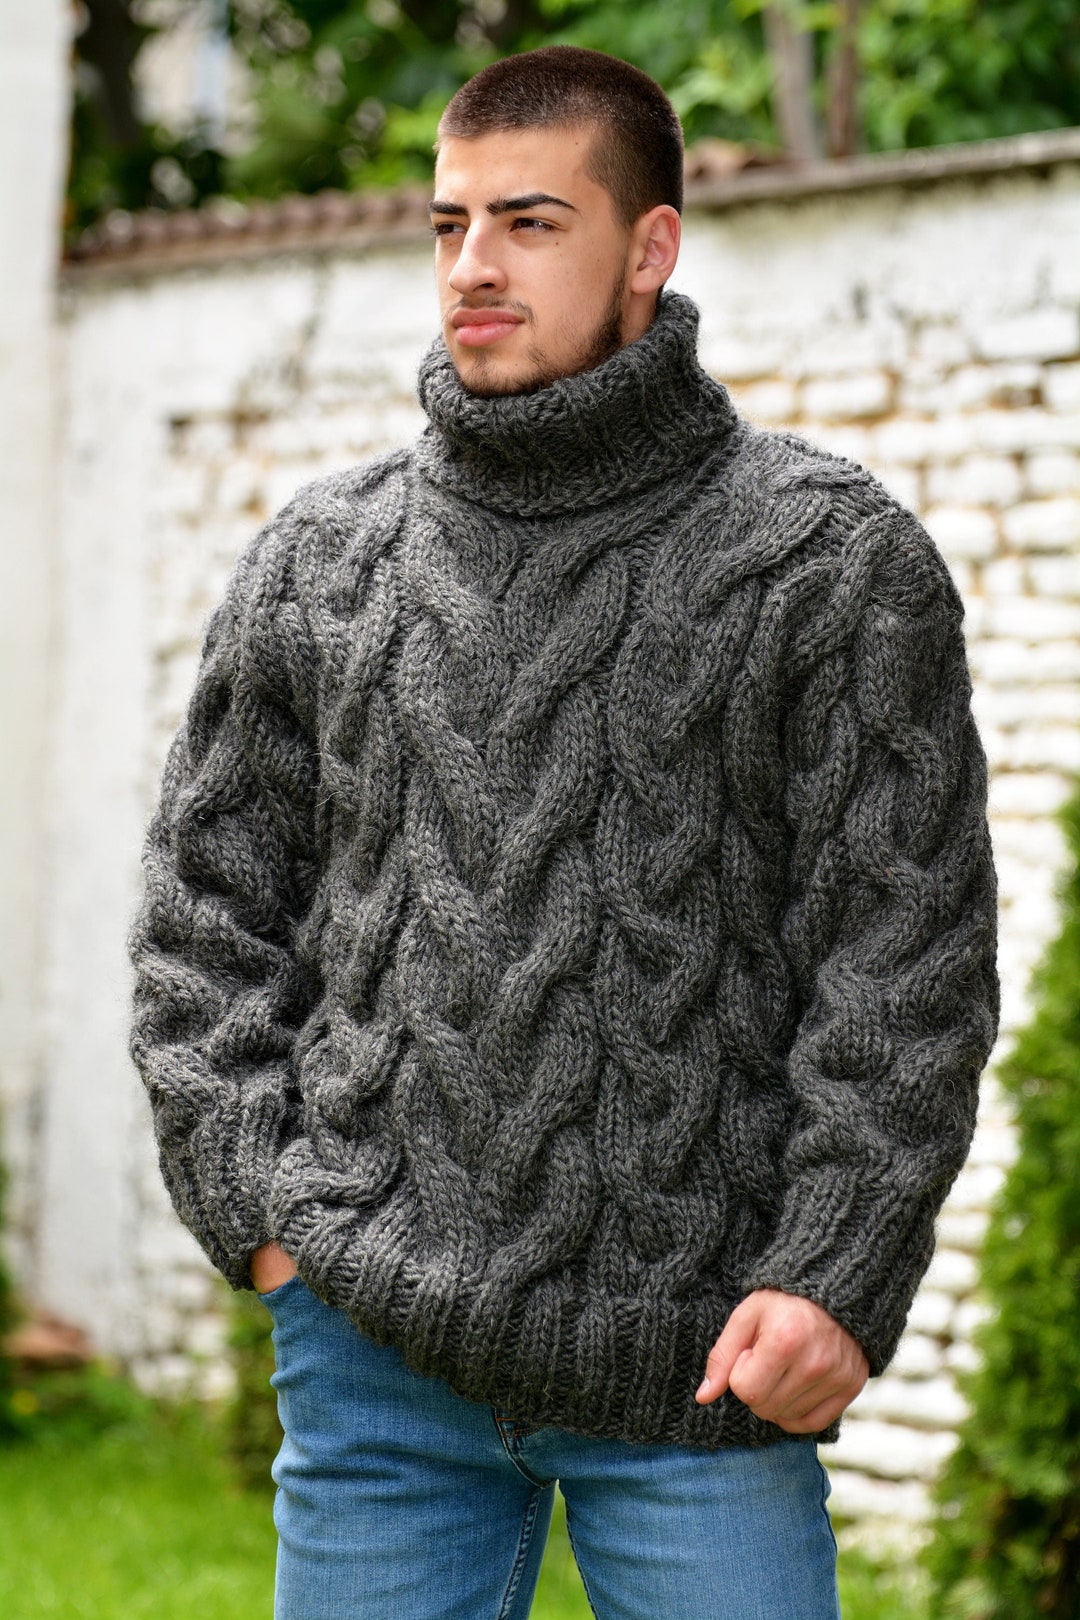 Hand Knitted Wool Sweater, Cable Handmade Pullover, Turtleneck Dark ...